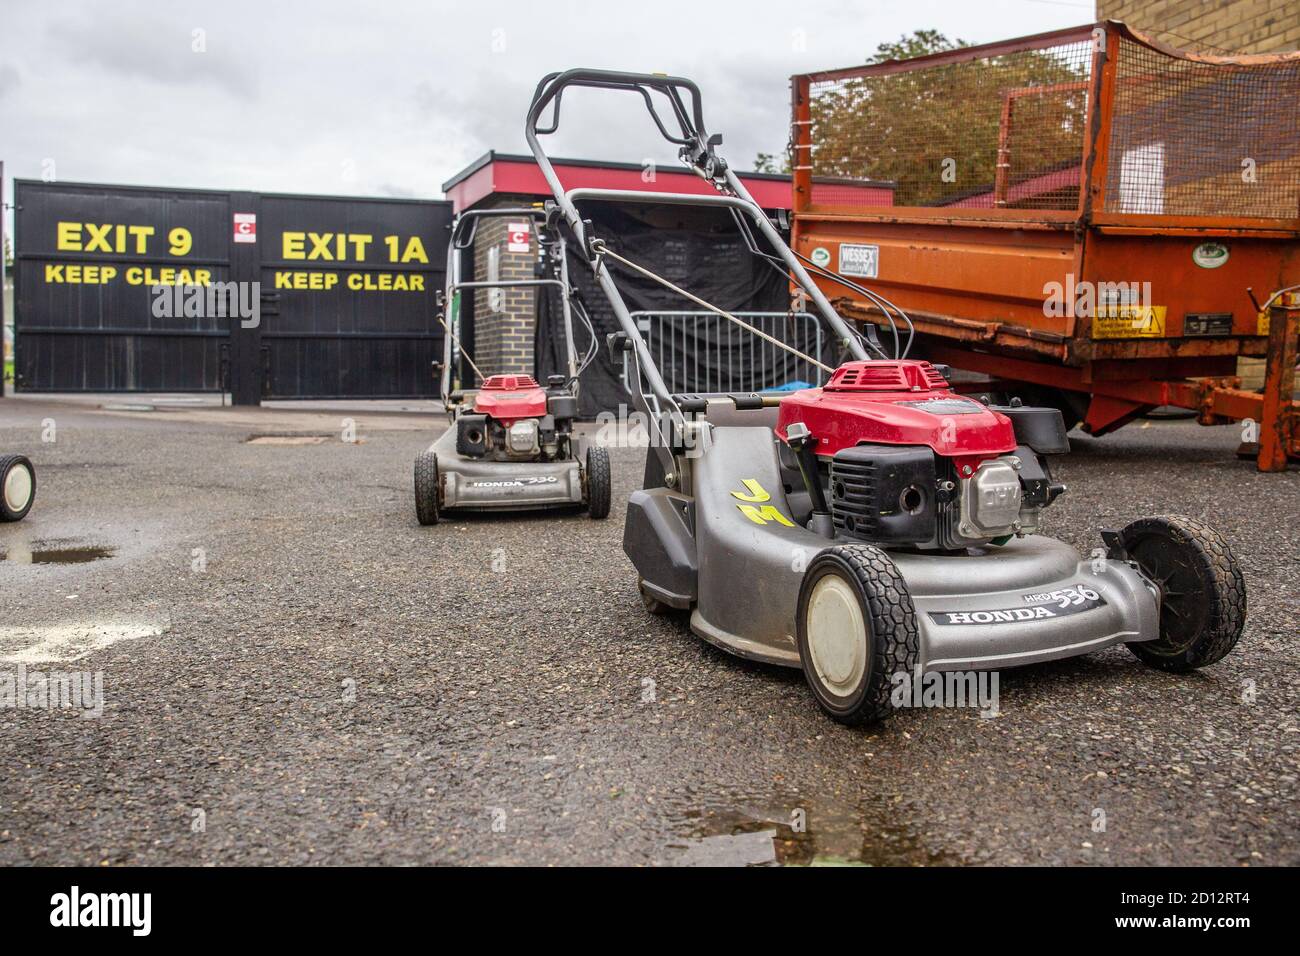 Lawnmowers at football ground set up ready to cut grass on football pitch at Football League Club Stevenage Stock Photo